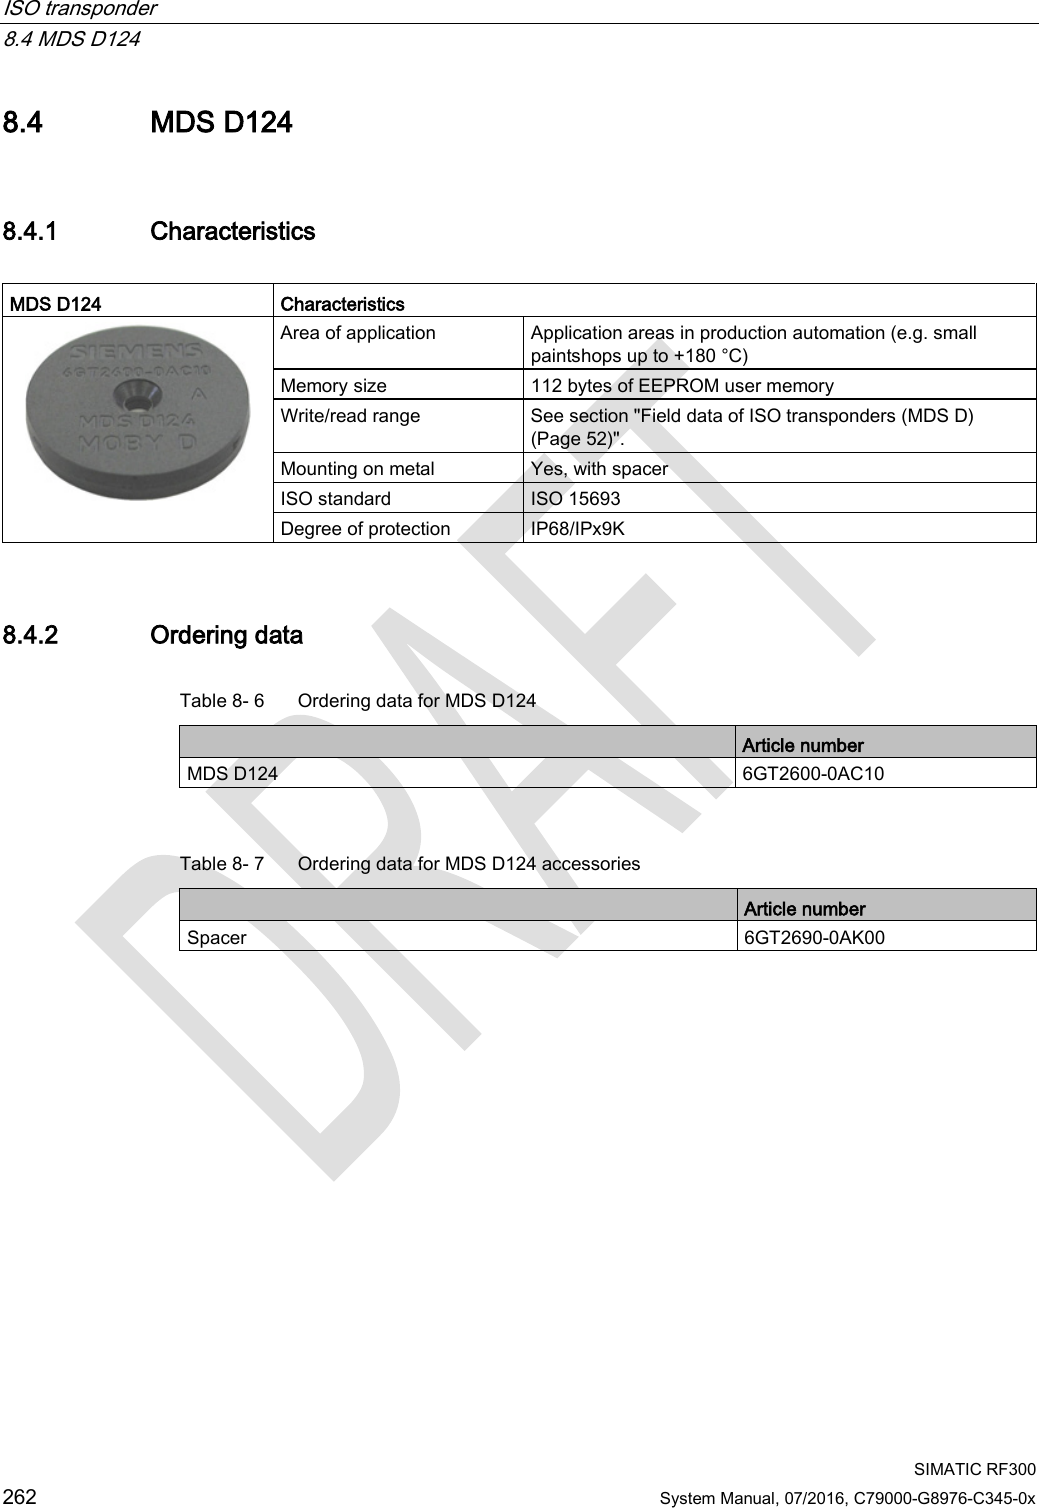 ISO transponder   8.4 MDS D124  SIMATIC RF300 262 System Manual, 07/2016, C79000-G8976-C345-0x 8.4 MDS D124 8.4.1 Characteristics  MDS D124 Characteristics  Area of application Application areas in production automation (e.g. small paintshops up to +180 °C) Memory size 112 bytes of EEPROM user memory Write/read range See section &quot;Field data of ISO transponders (MDS D) (Page 52)&quot;. Mounting on metal Yes, with spacer ISO standard ISO 15693 Degree of protection IP68/IPx9K 8.4.2 Ordering data Table 8- 6  Ordering data for MDS D124  Article number MDS D124 6GT2600-0AC10  Table 8- 7  Ordering data for MDS D124 accessories  Article number Spacer 6GT2690-0AK00 